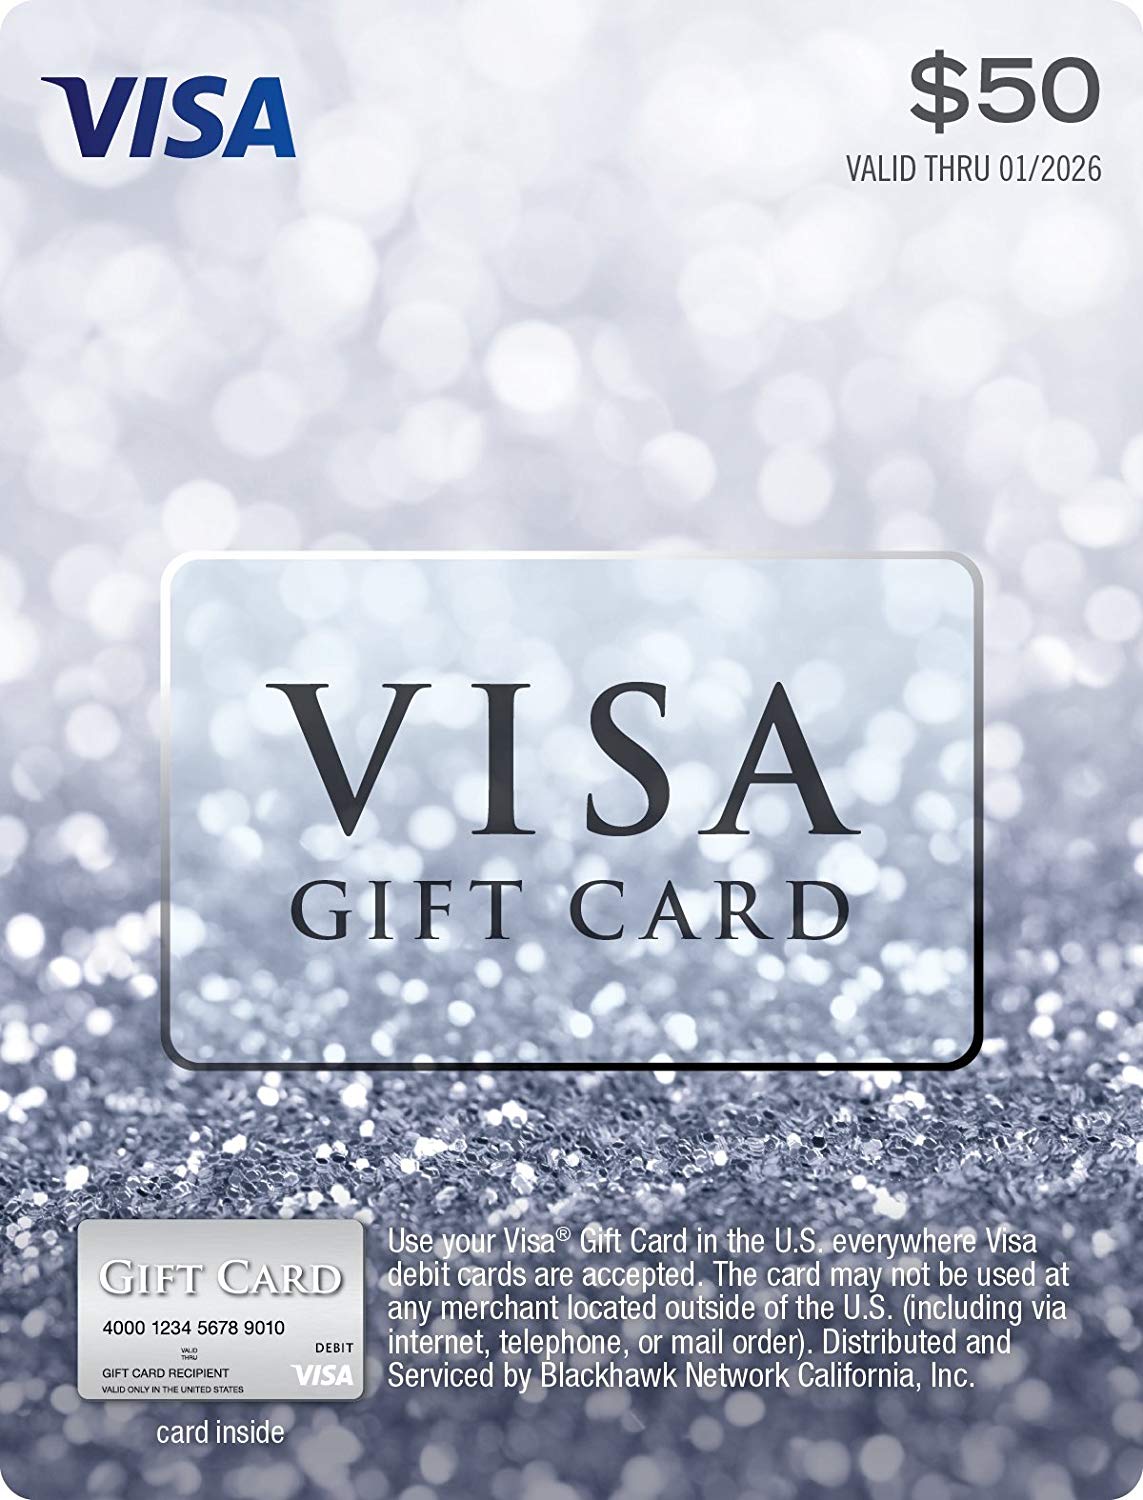 What banks sell visa gift cards